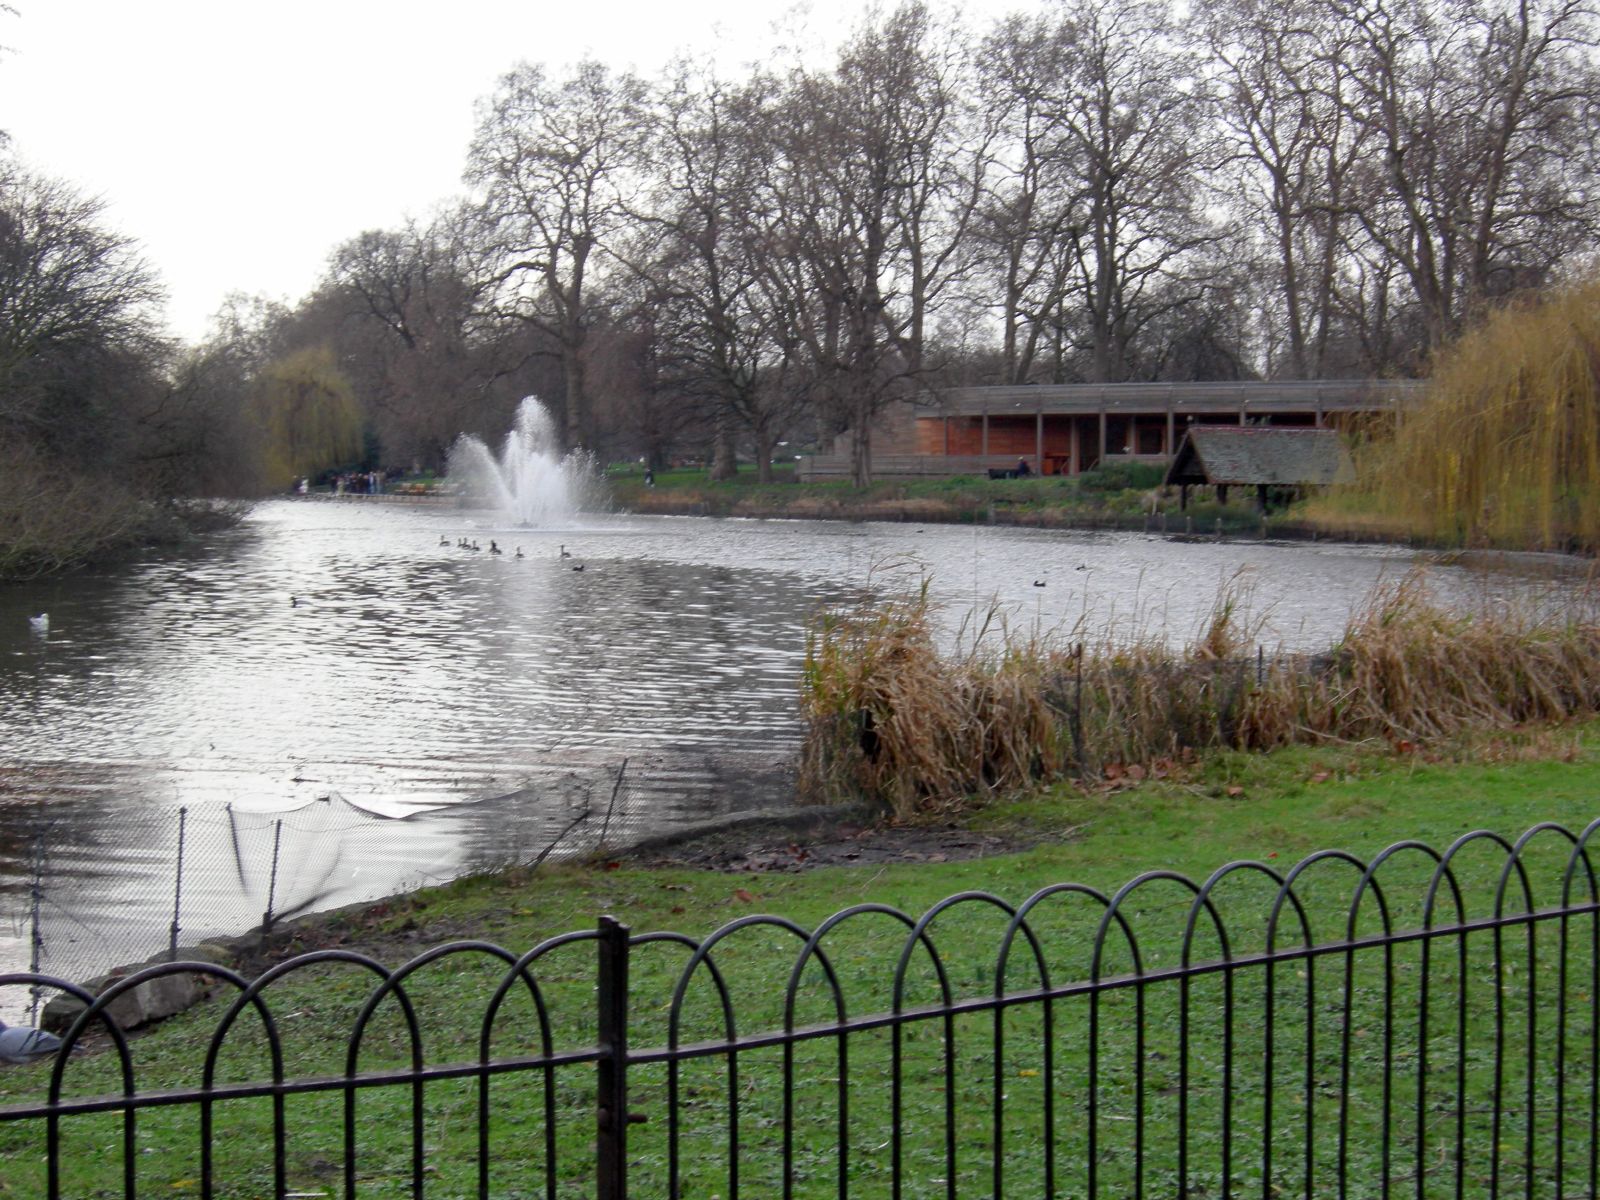 a park with a pond, a fountain, a fence and some benches